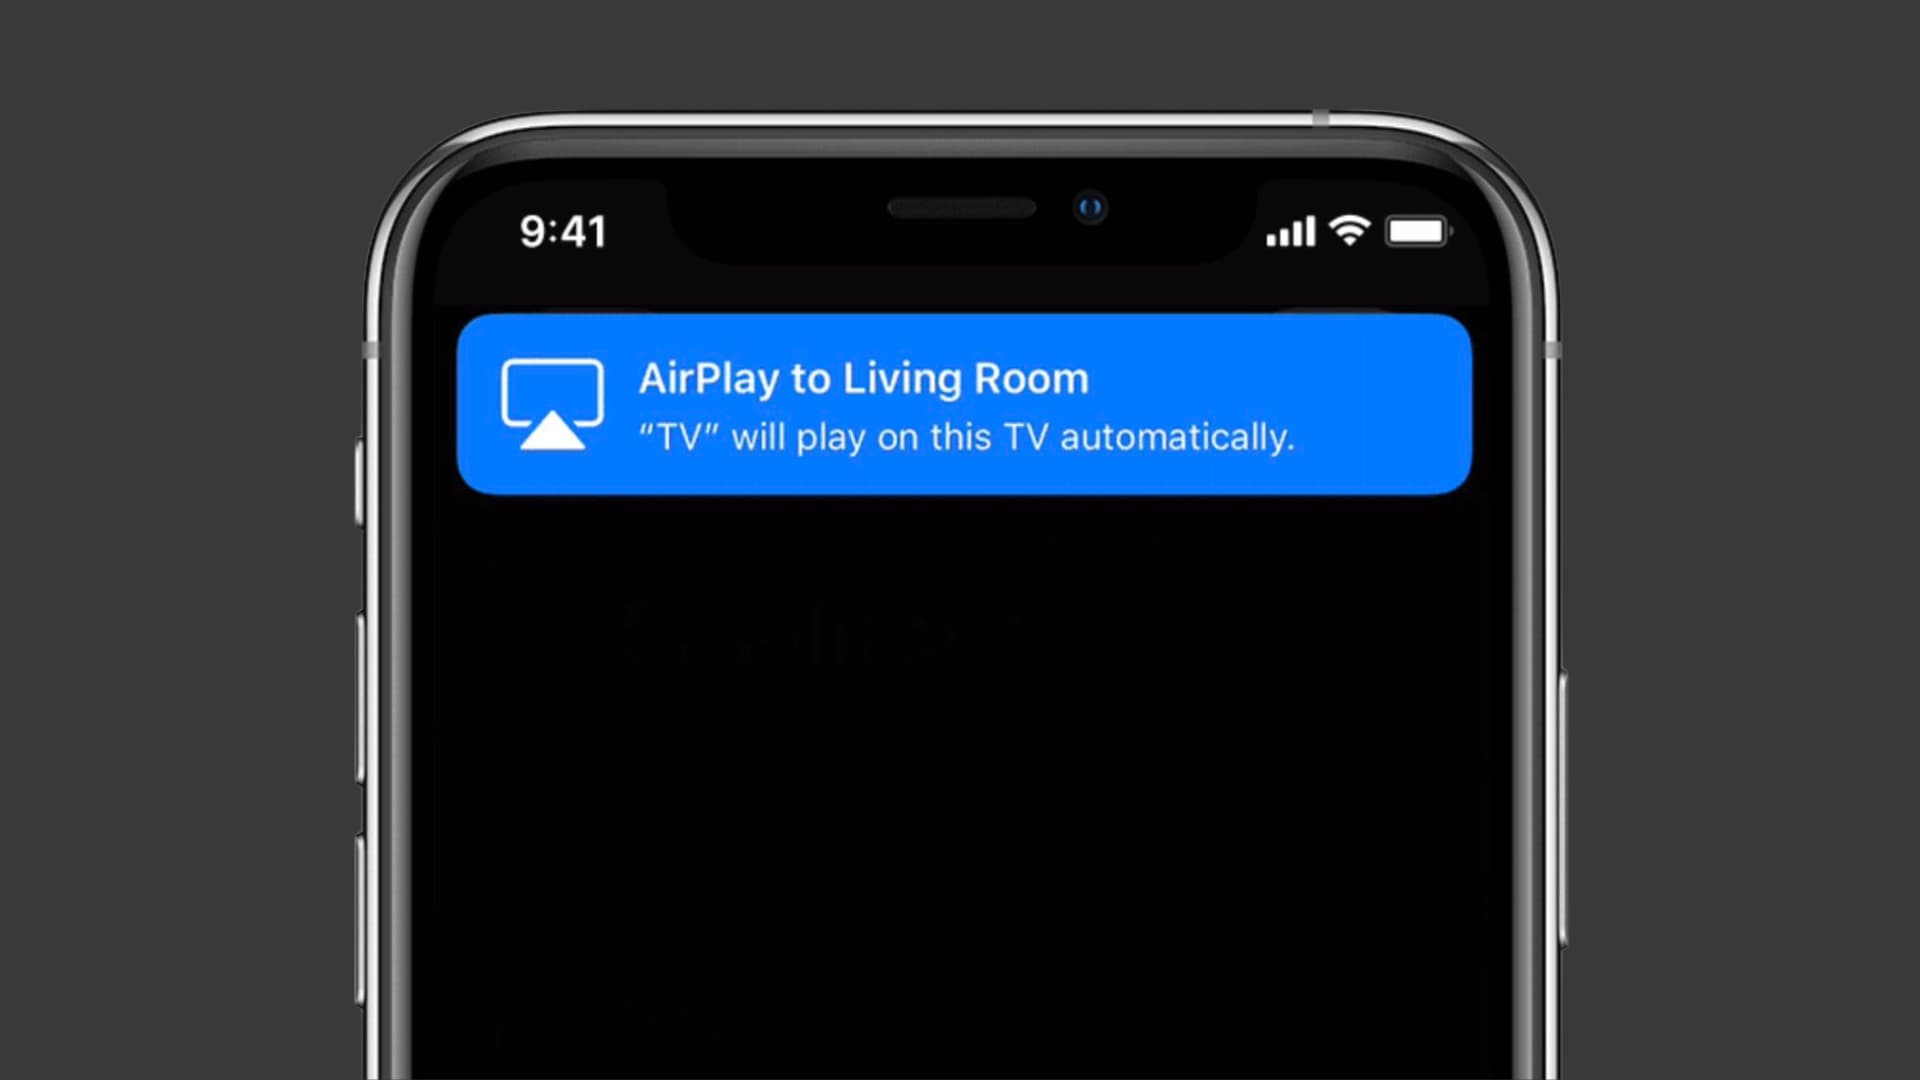 Automatic AirPlay prompt on iPhone